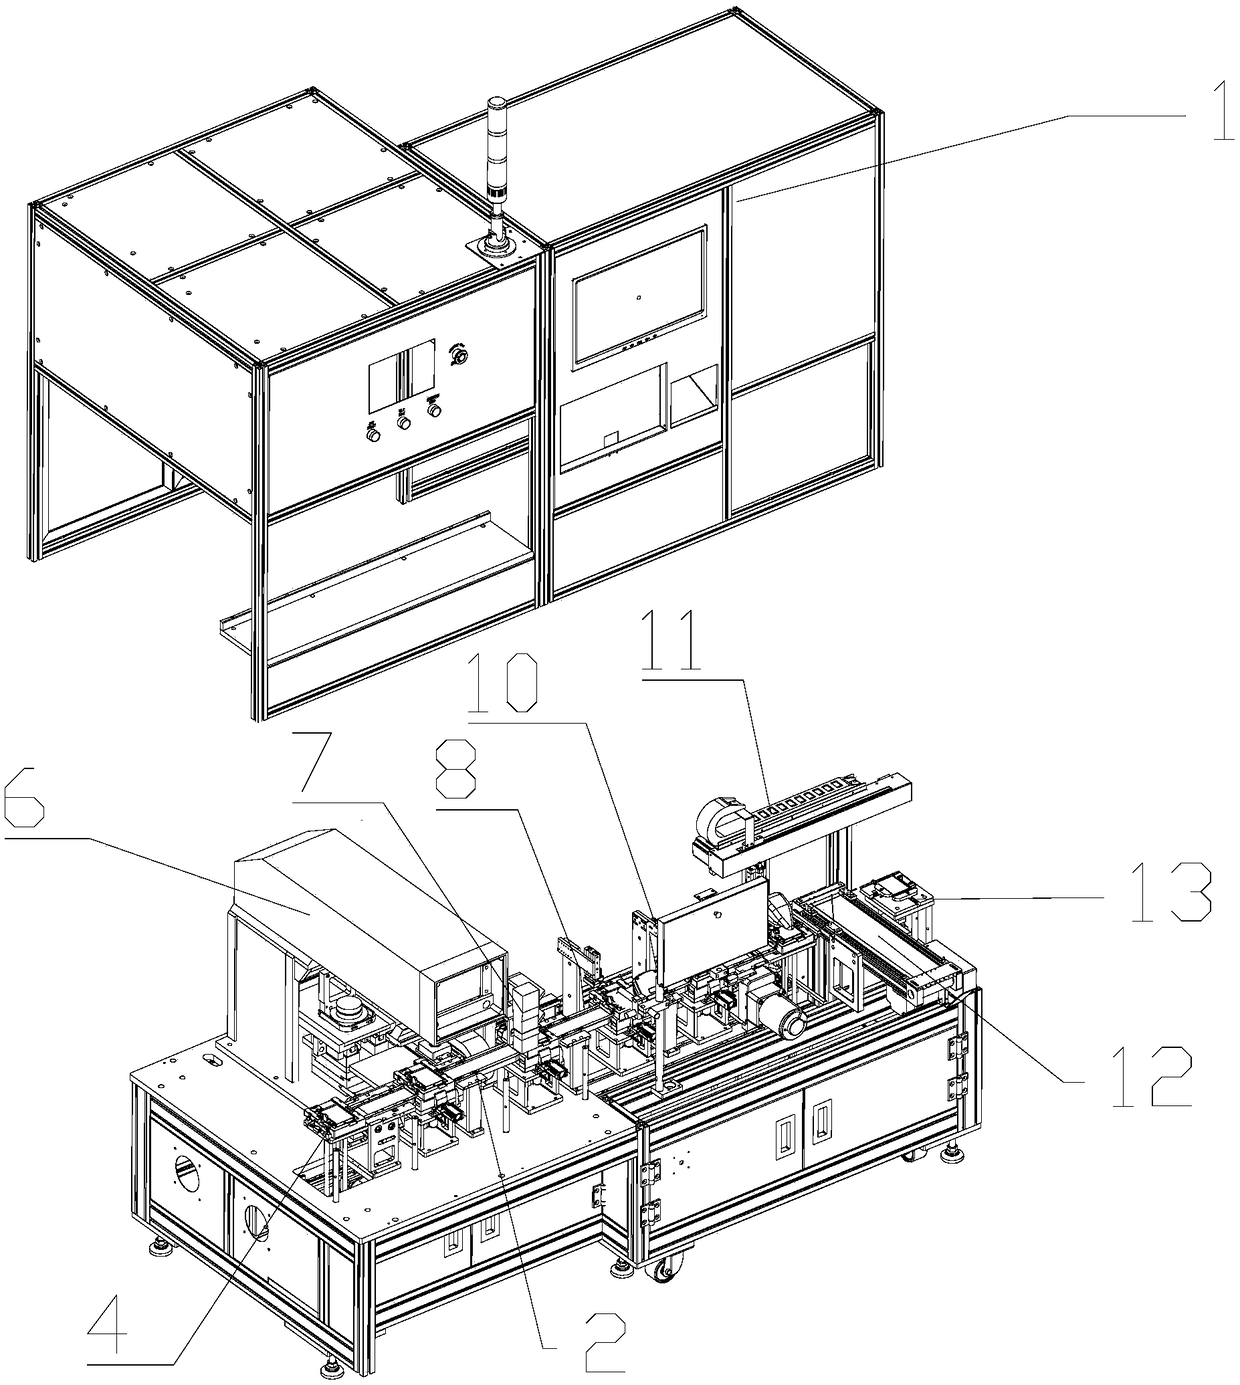 Positioning mechanism for lithium battery carrier transportation